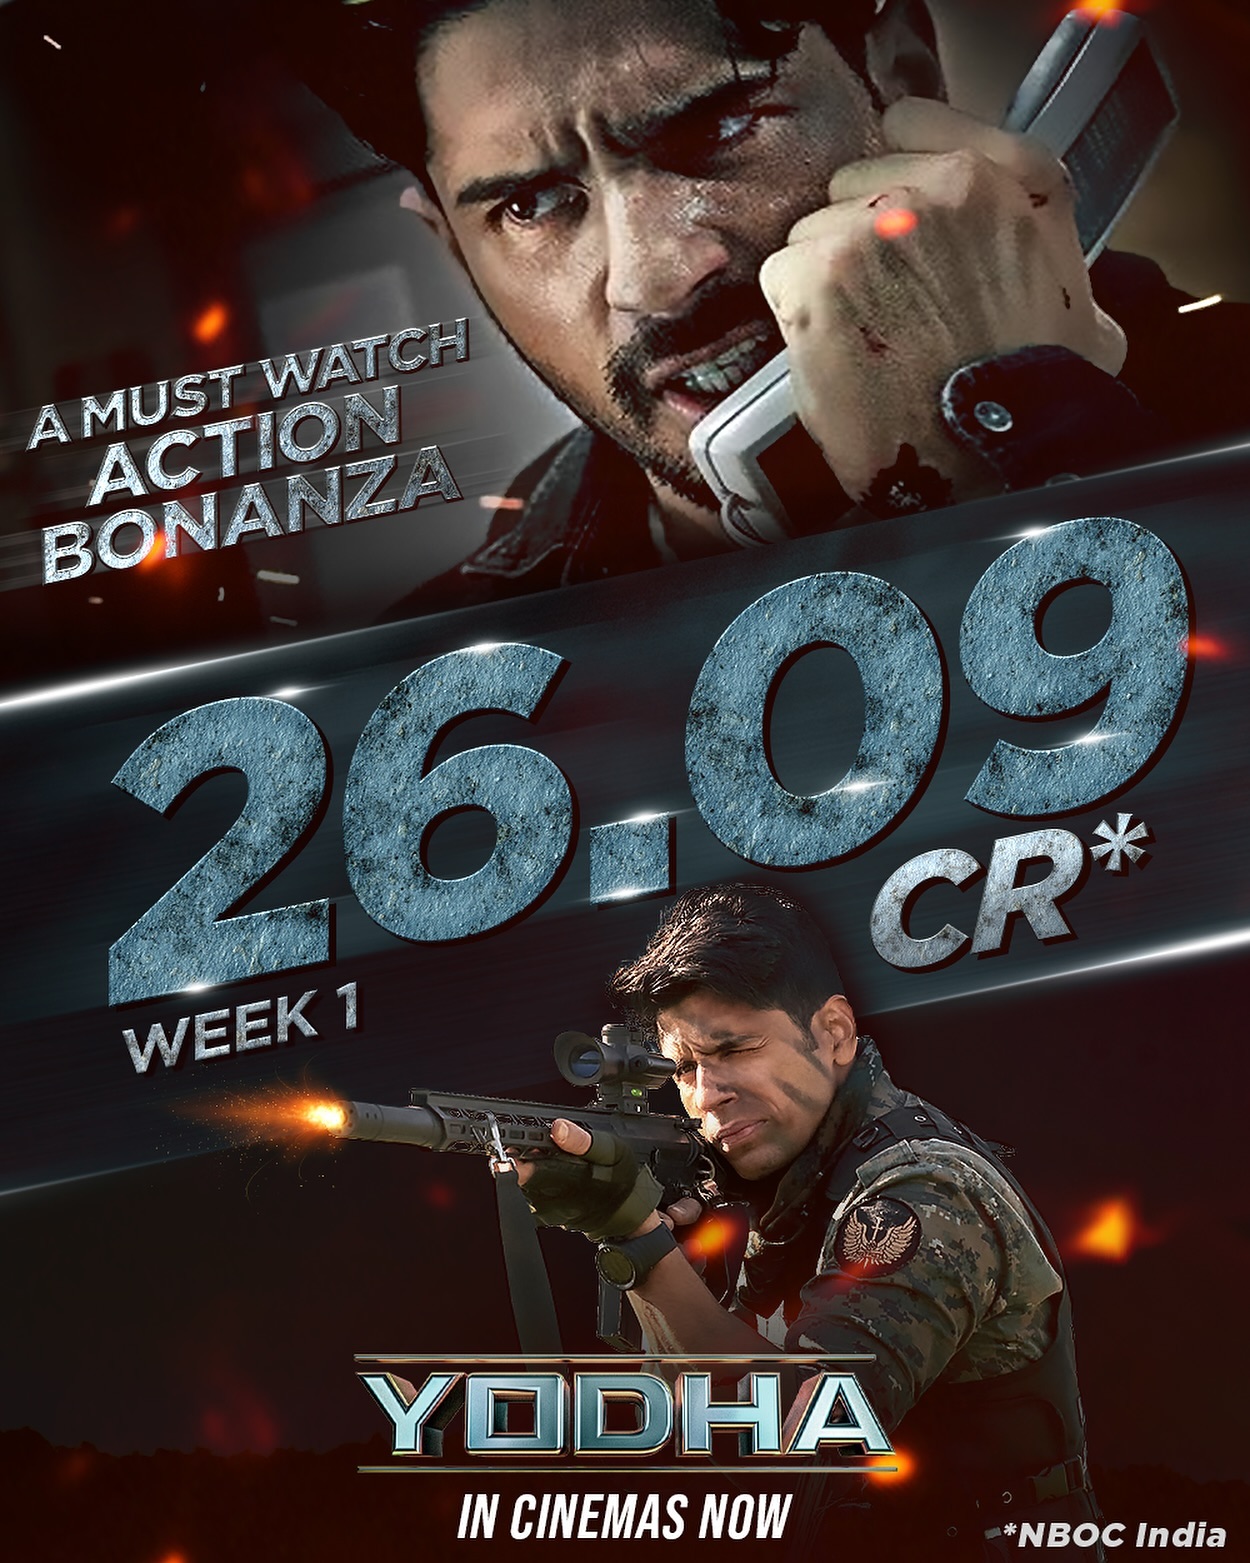 Yodha week 1 collections